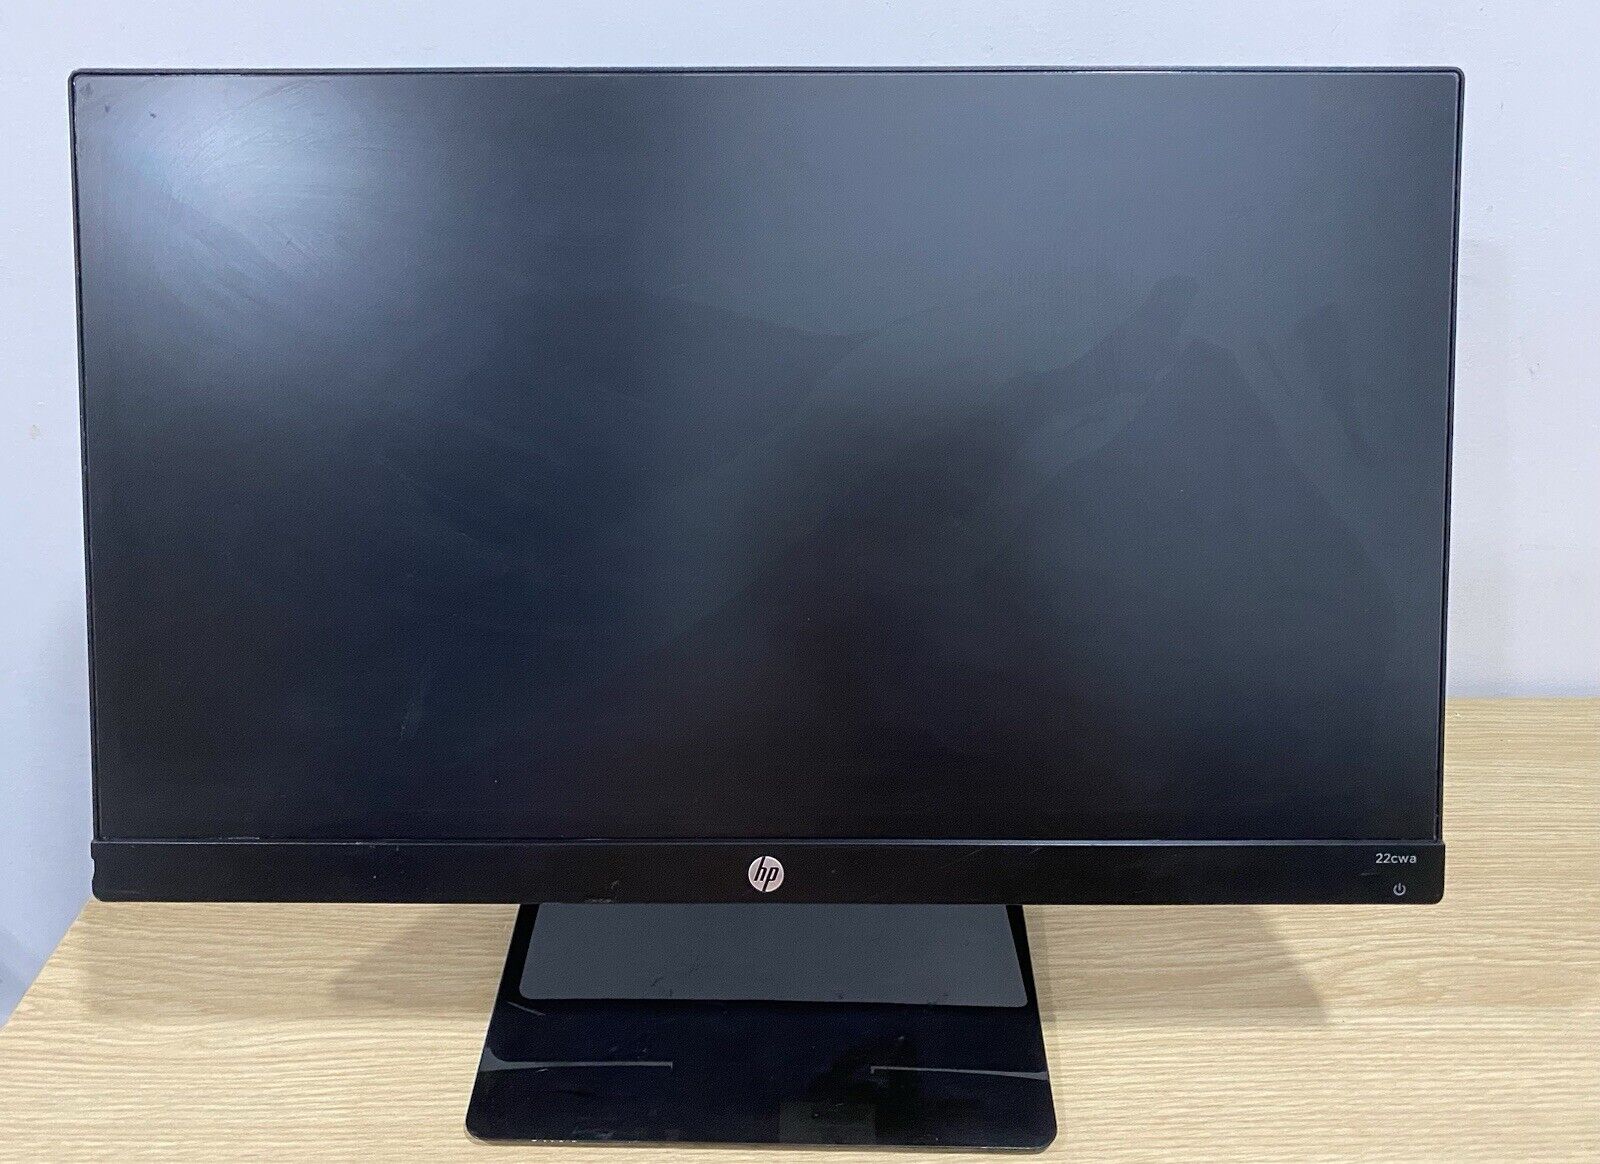 HP 22cwa 21.5-Inch Monitor - Retails $160 - COMES WITH POWER SUPPLY